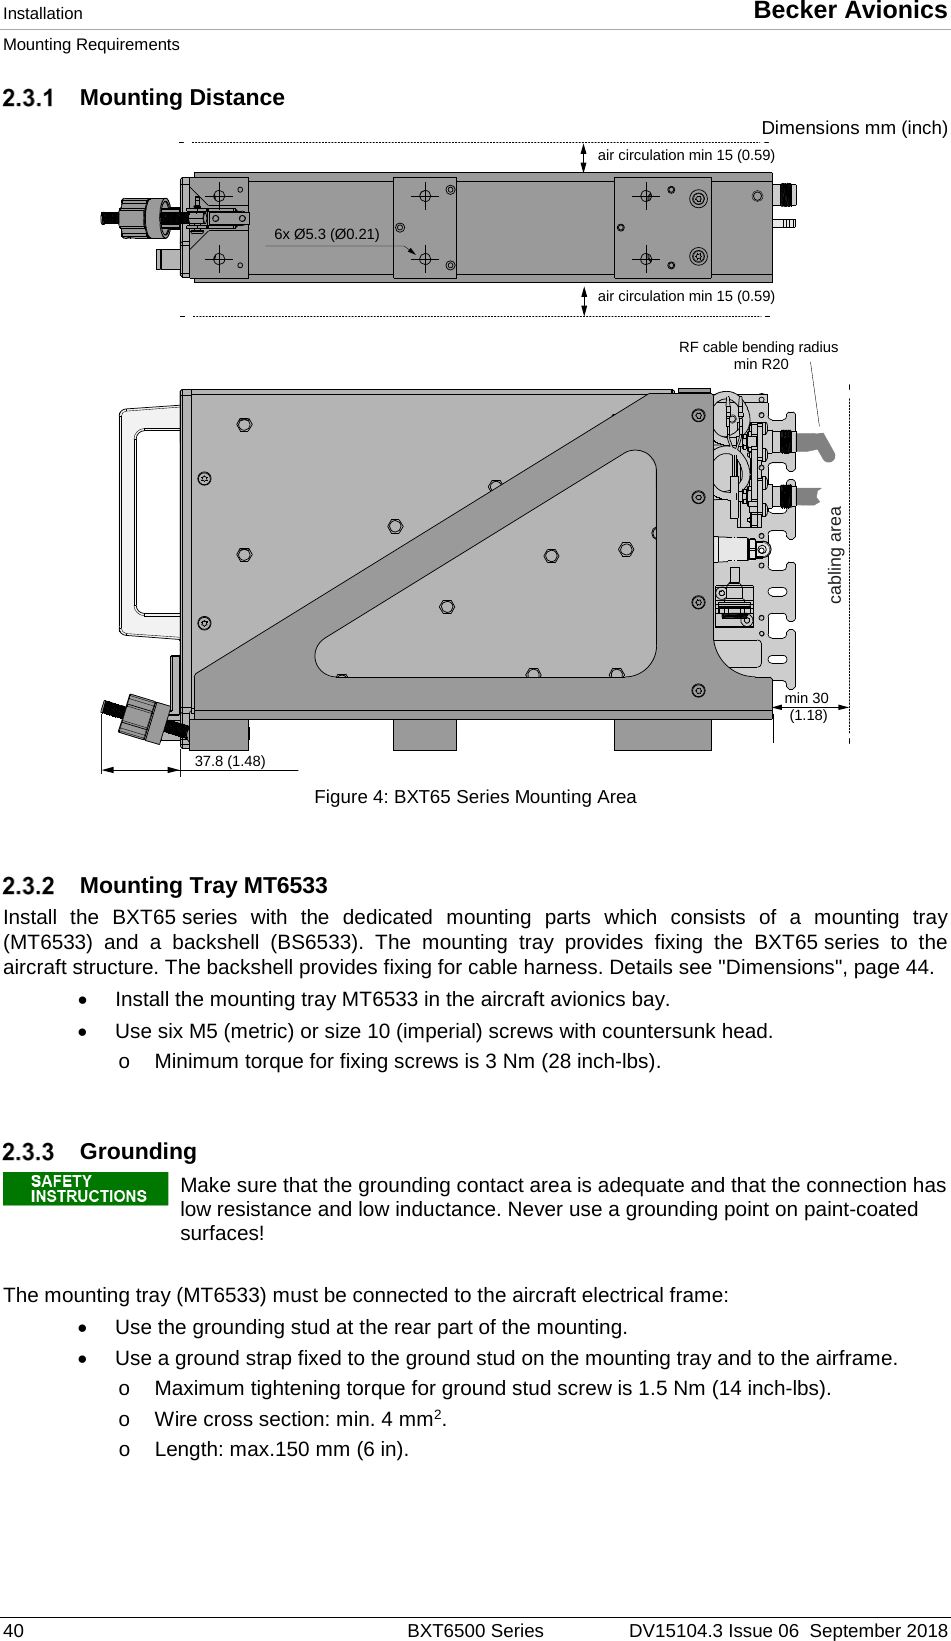 Installation  Becker Avionics Mounting Requirements  40  BXT6500 Series DV15104.3 Issue 06  September 2018  Mounting Distance Dimensions mm (inch)  Figure 4: BXT65 Series Mounting Area     Mounting Tray MT6533 Install the BXT65 series with the dedicated mounting parts which consists of a mounting tray (MT6533) and a backshell (BS6533). The mounting tray provides fixing the BXT65 series to the aircraft structure. The backshell provides fixing for cable harness. Details see &quot;Dimensions&quot;, page 44. • Install the mounting tray MT6533 in the aircraft avionics bay. • Use six M5 (metric) or size 10 (imperial) screws with countersunk head.  o Minimum torque for fixing screws is 3 Nm (28 inch-lbs).    Grounding   Make sure that the grounding contact area is adequate and that the connection has low resistance and low inductance. Never use a grounding point on paint-coated surfaces!   The mounting tray (MT6533) must be connected to the aircraft electrical frame: • Use the grounding stud at the rear part of the mounting. • Use a ground strap fixed to the ground stud on the mounting tray and to the airframe.  o Maximum tightening torque for ground stud screw is 1.5 Nm (14 inch-lbs). o Wire cross section: min. 4 mm2. o Length: max.150 mm (6 in).    37.8 (1.48)min 30(1.18)cabling areaair circulation min 15 (0.59)air circulation min 15 (0.59)RF cable bending radiusmin R206x Ø5.3 (Ø0.21)